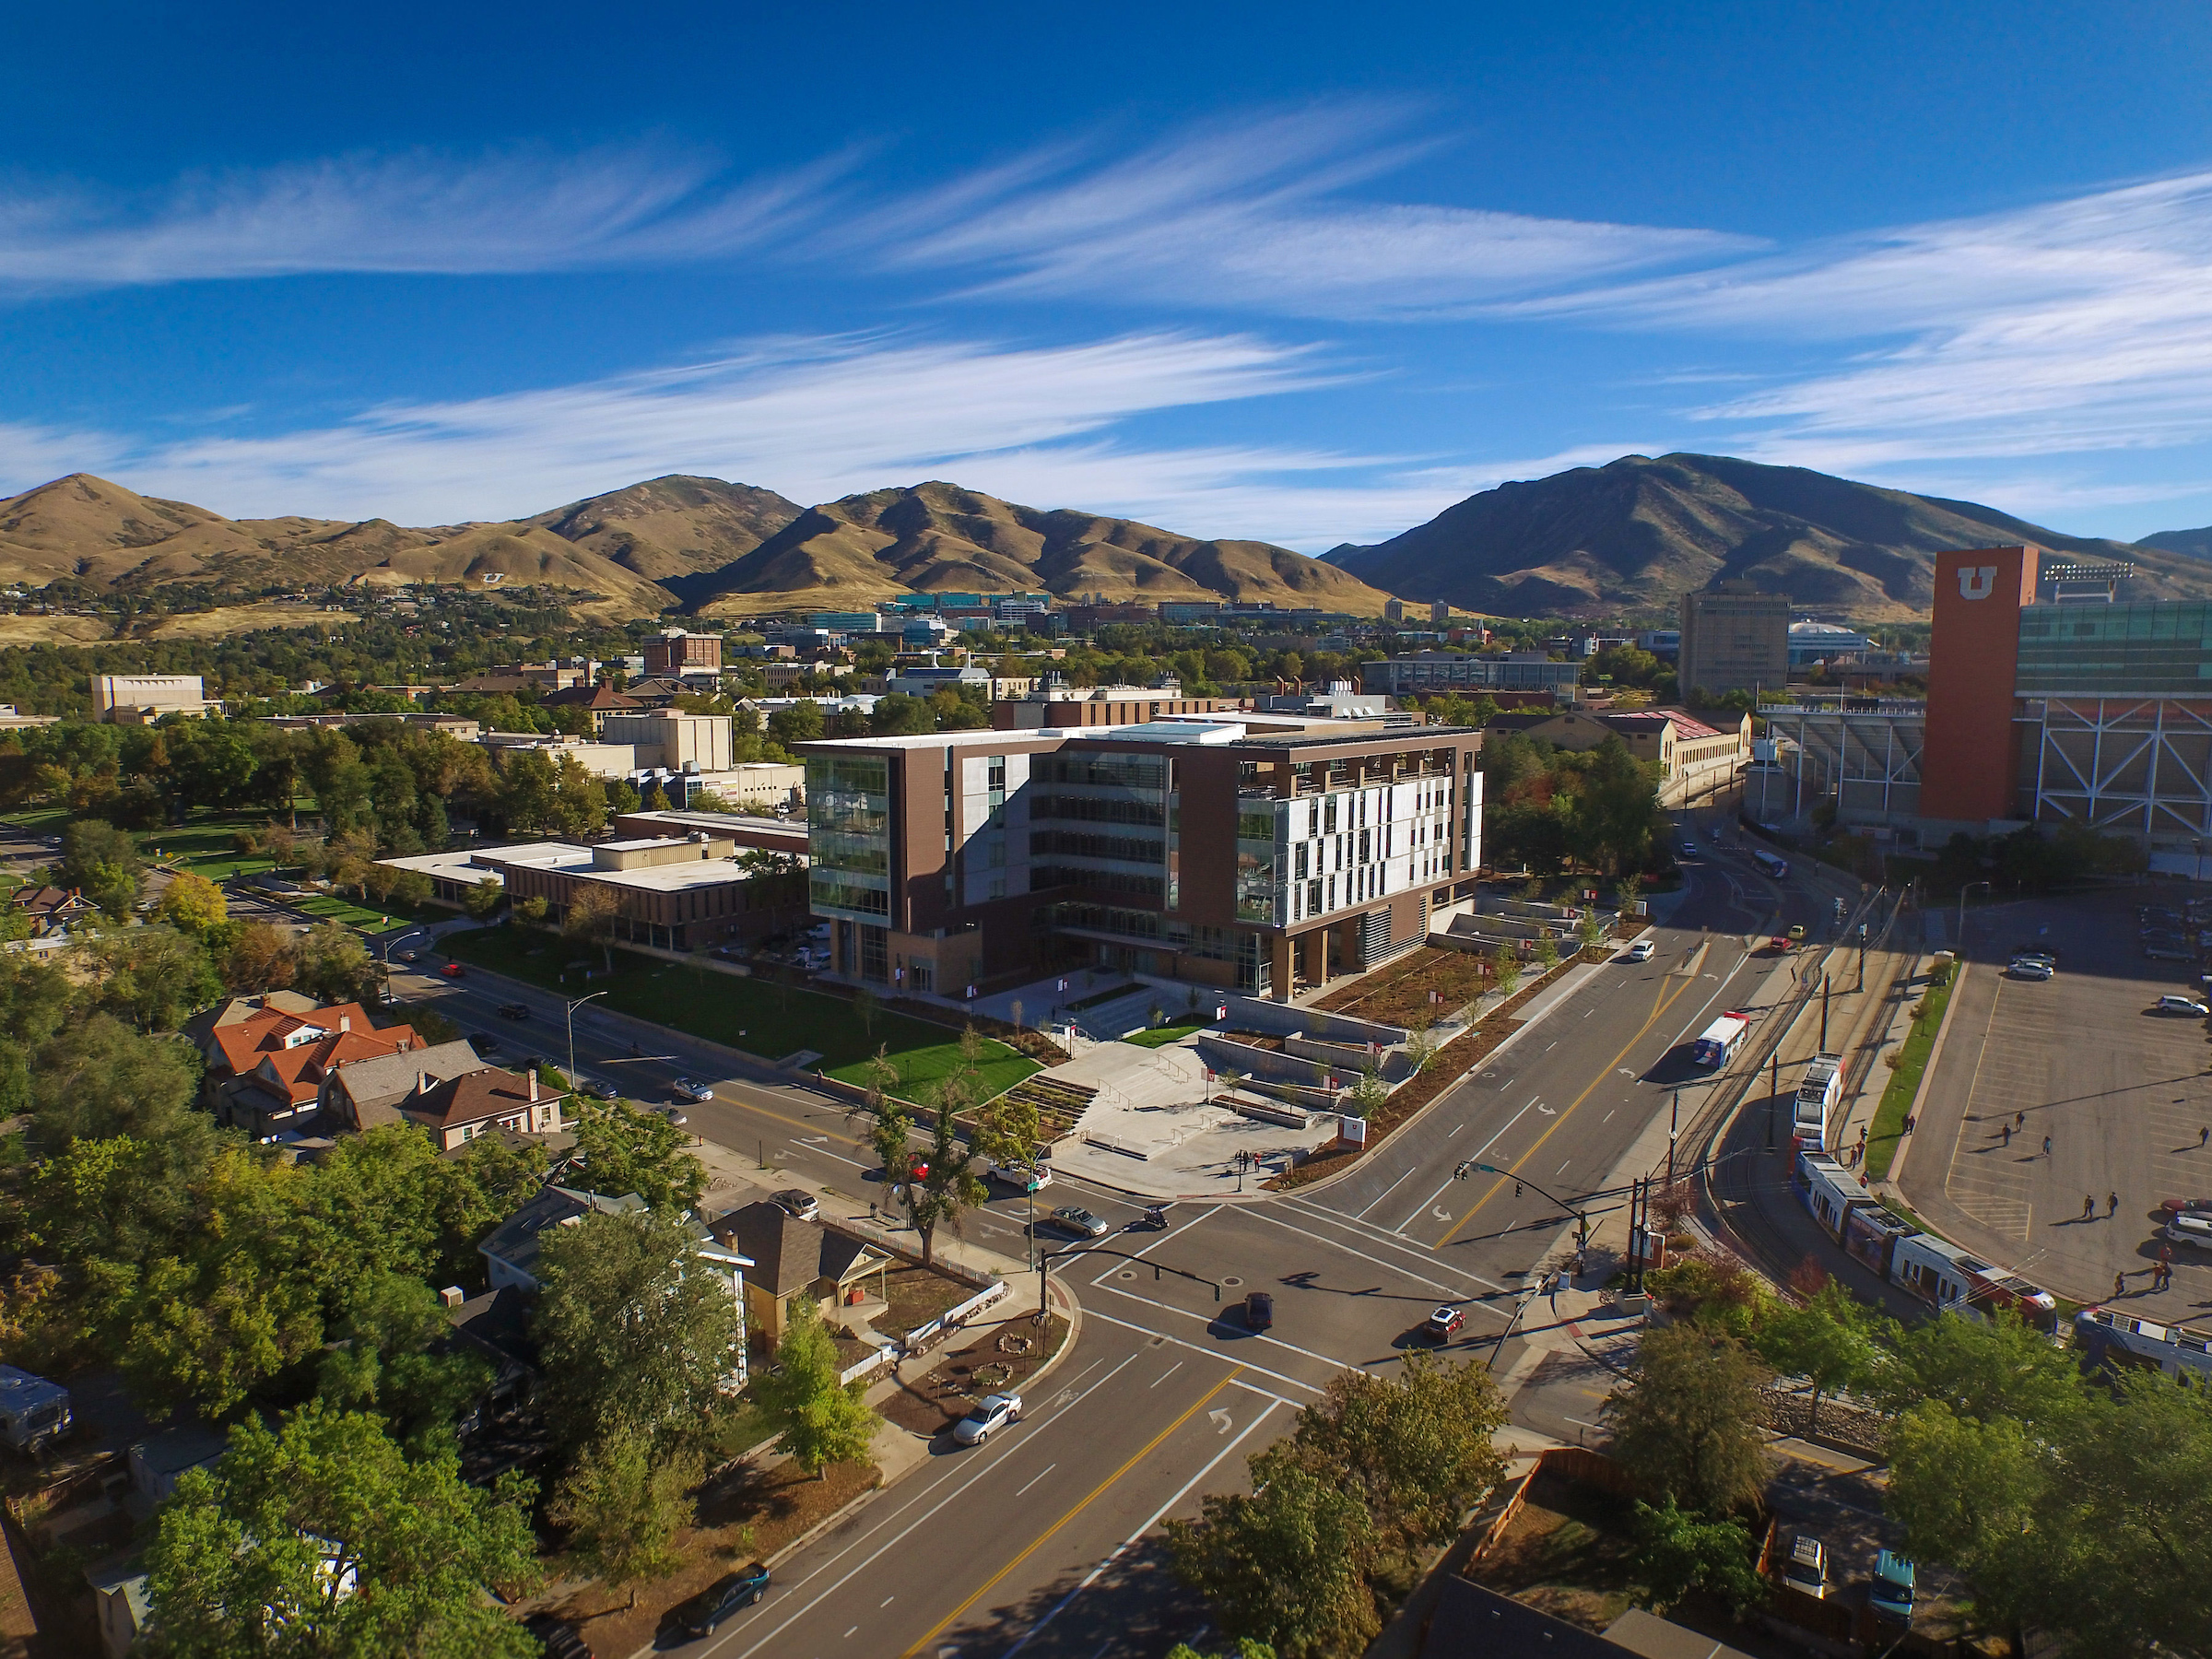 an aerial view of the University of Utah campus from the intersection of 1300 East and 300 South